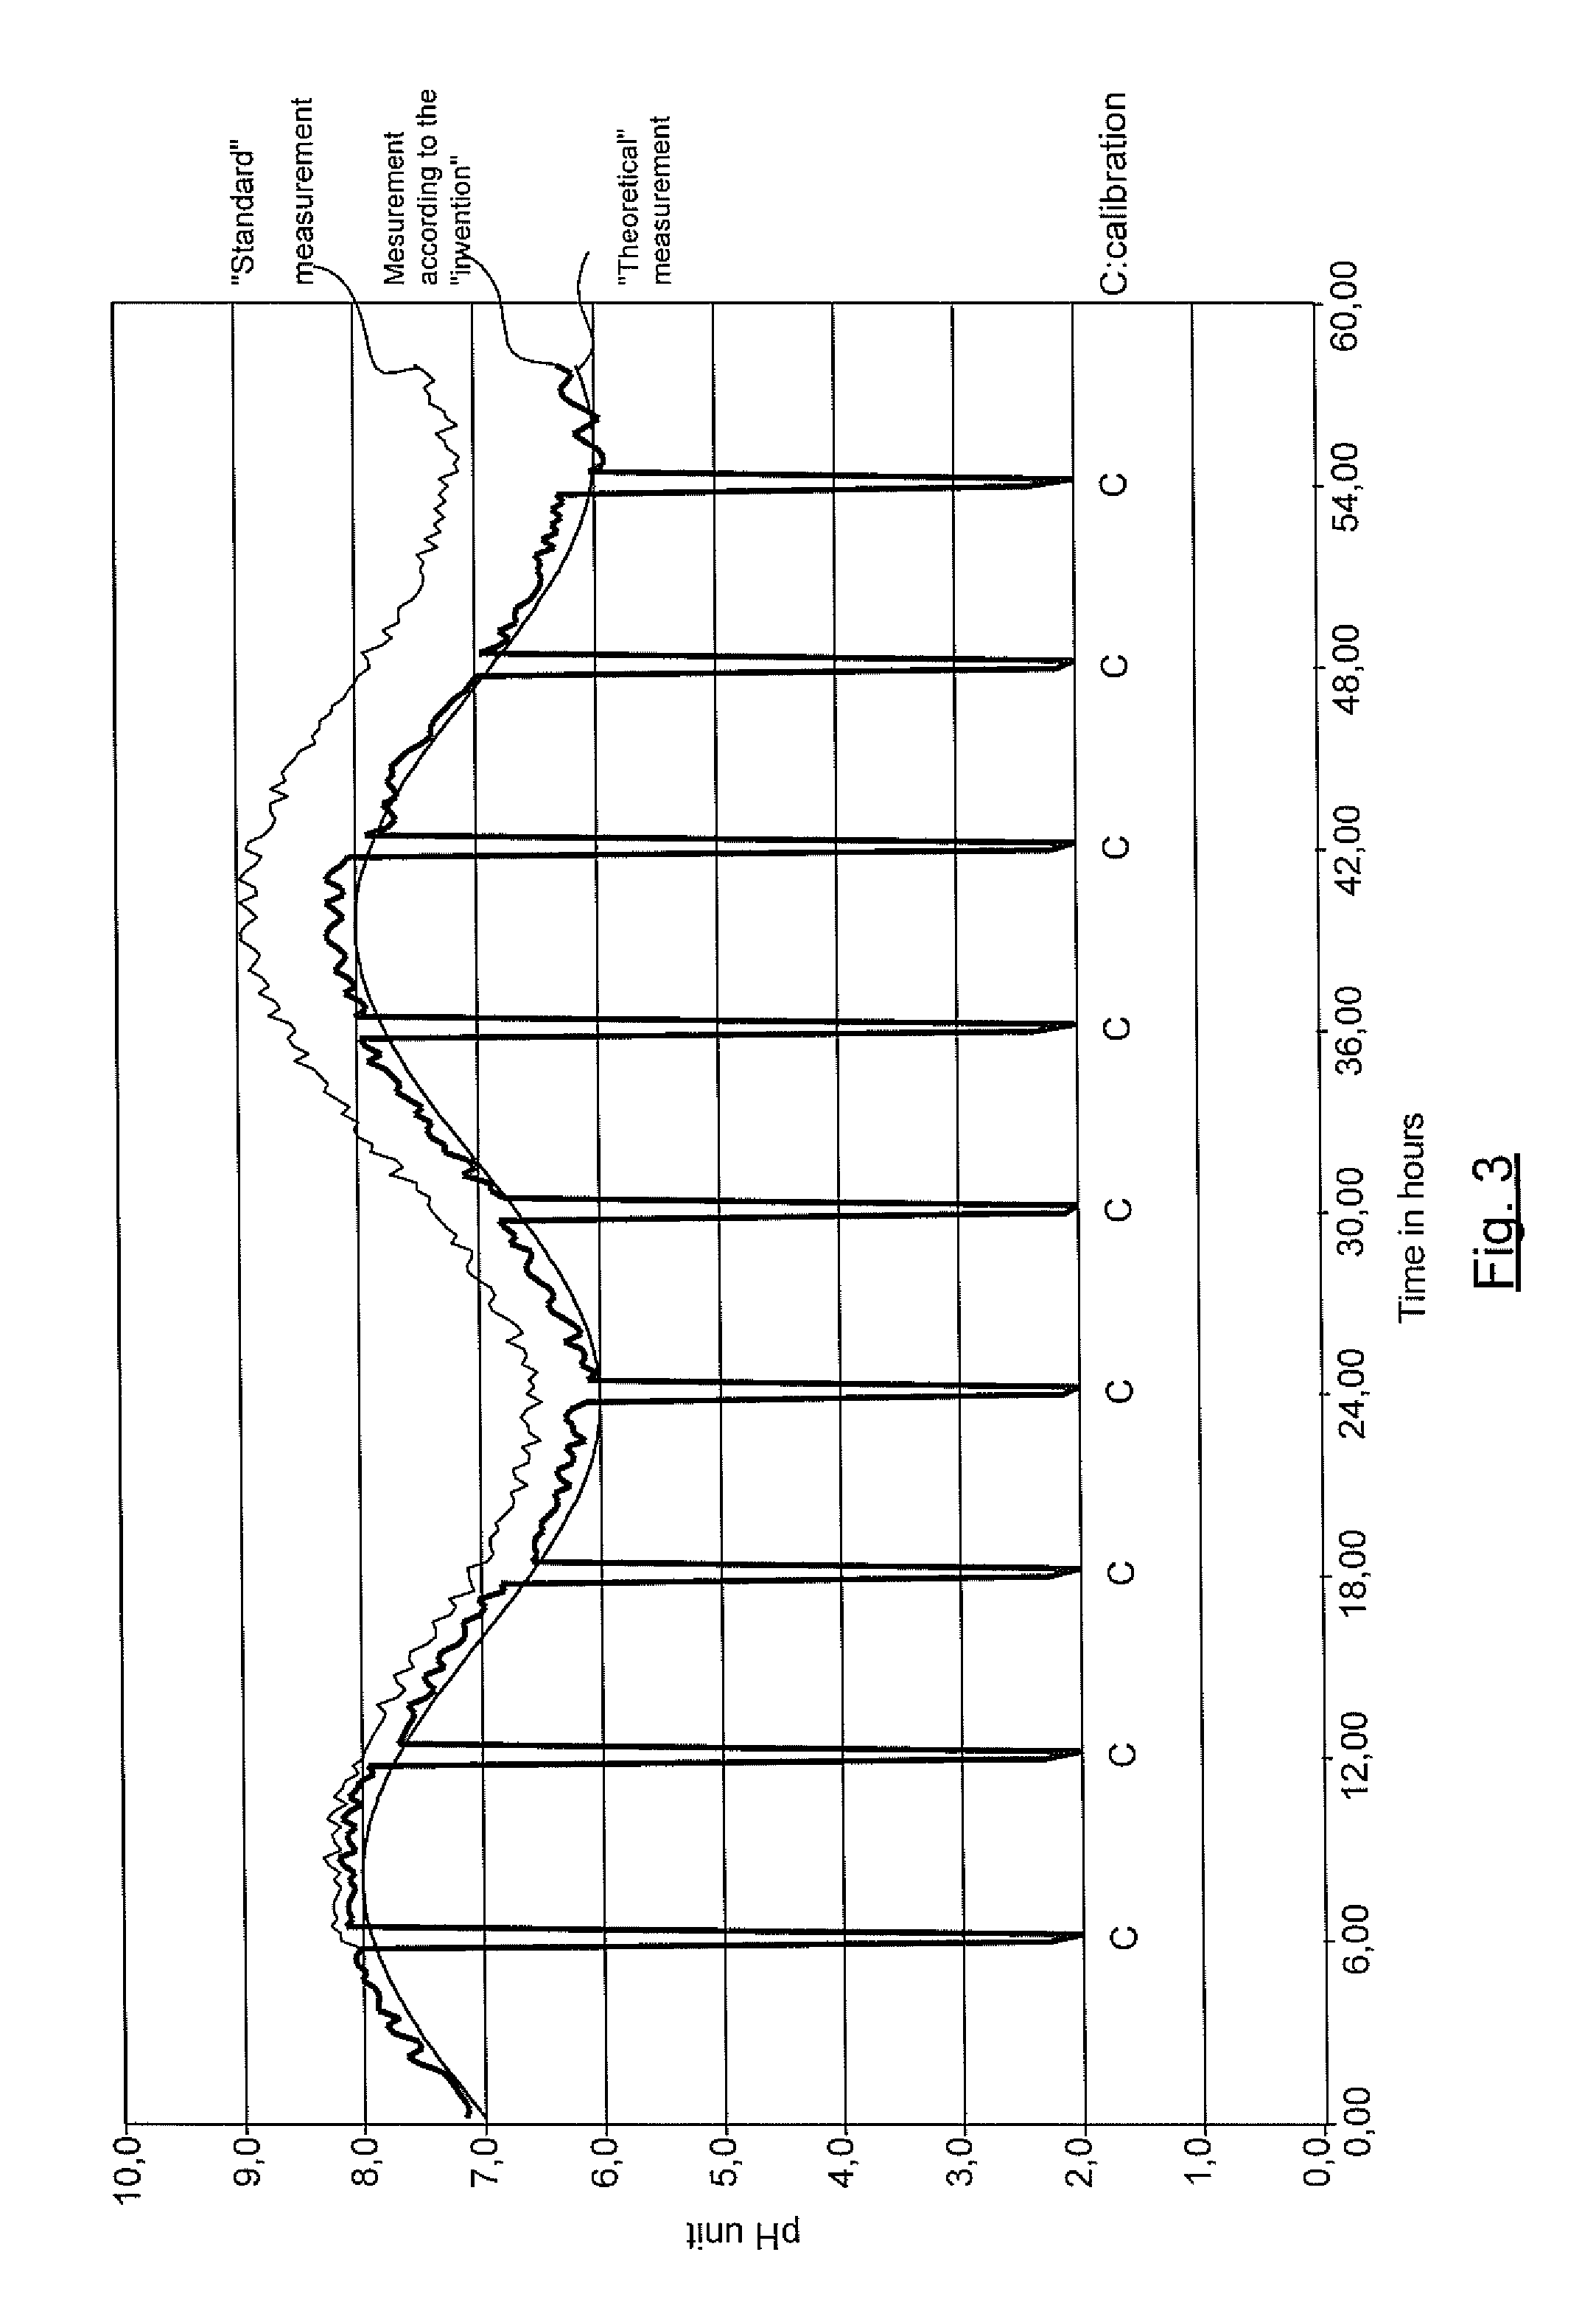 Ph value measuring device comprising in situ calibration means